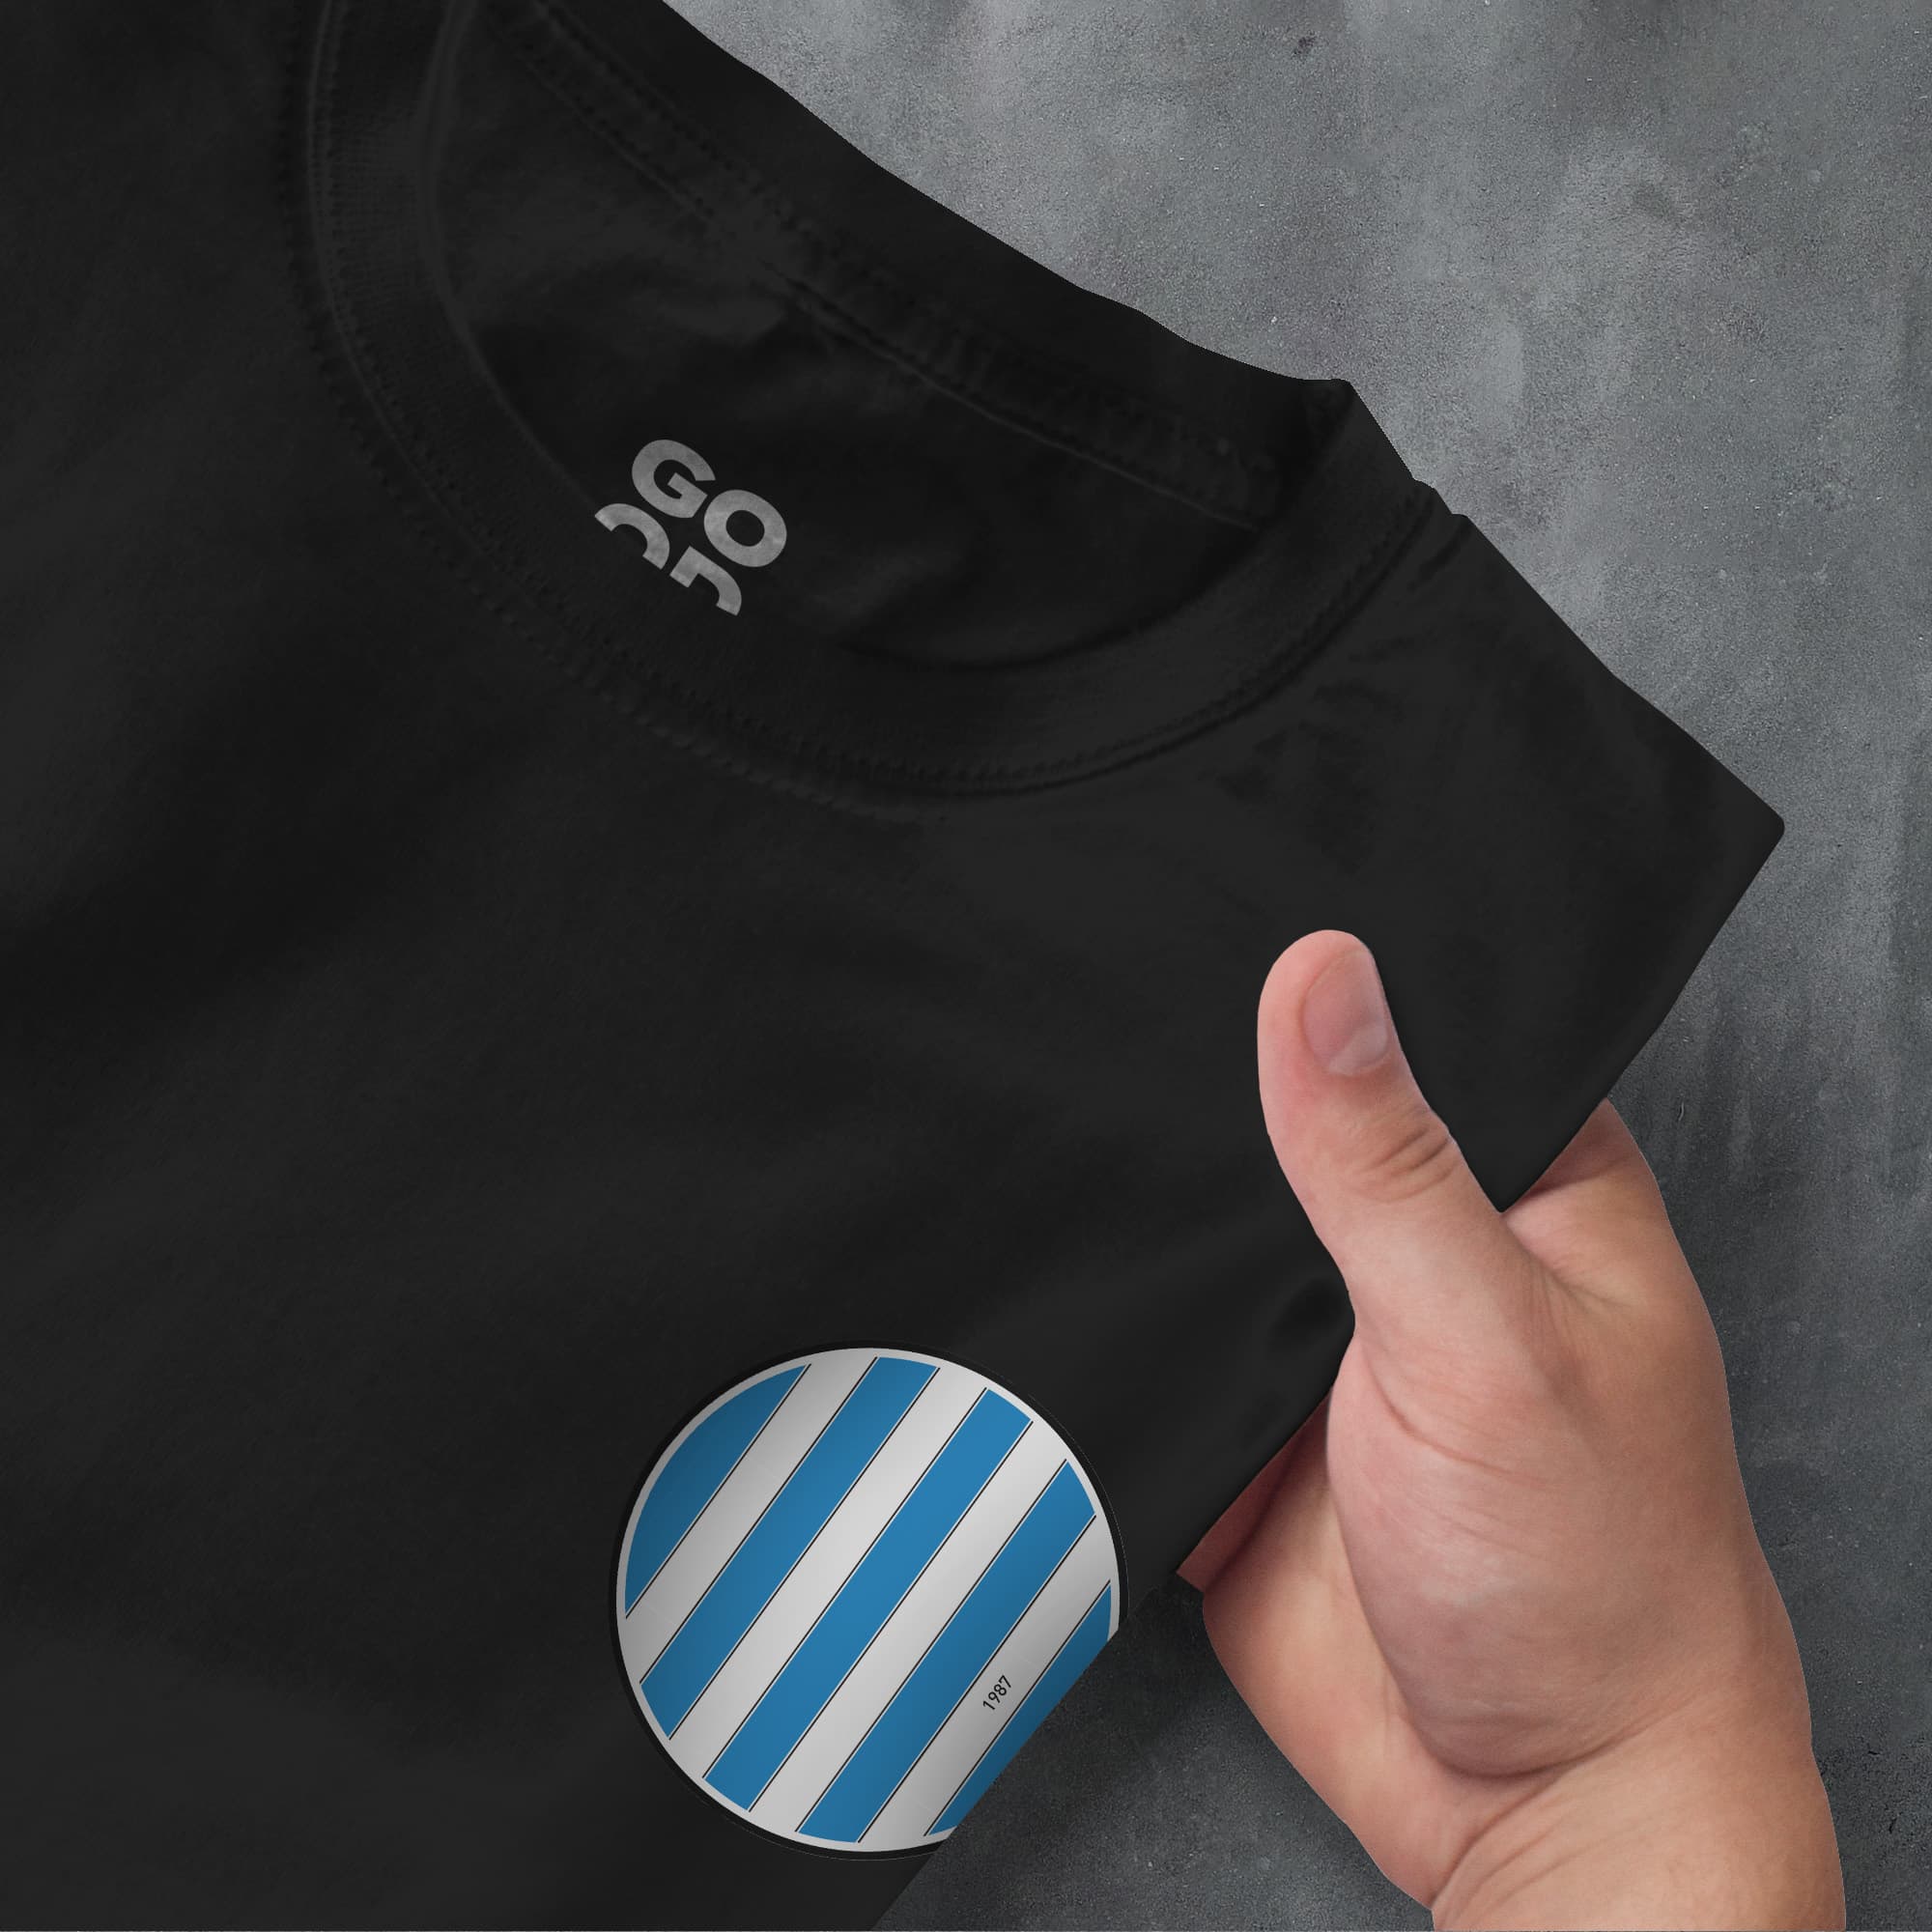 a person holding a blue and white striped sticker on a black shirt